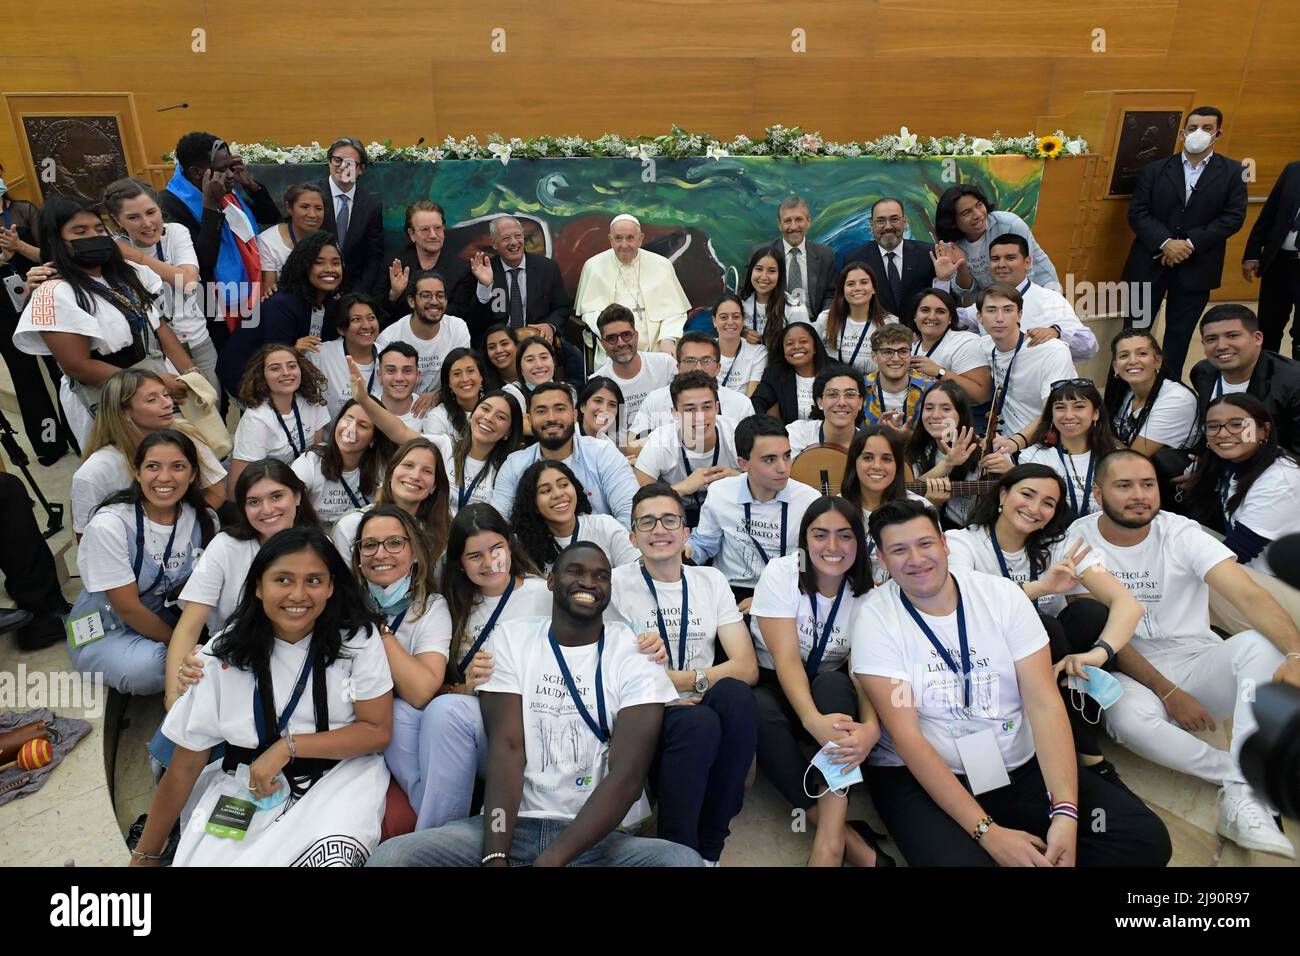 Vatican, Vatican. 19th May, 2022. Italy, Rome, 2022/05/19 .Pope Francis (R), Jose Maria del Corral (C), founder of Scholas Occurrentes arrives and frontman of Irish rock band U2, Bono (Paul David Hewson) pose together with young members of the association the Pontifical Urbaniana University in Rome, on the occasion of the launch of the Scholas Occurrentes International Movement Photograph by Vatican Media/Catholic Press Photo. RESTRICTED TO EDITORIAL USE - NO MARKETING - NO ADVERTISING CAMPAIGNS Credit: Independent Photo Agency/Alamy Live News Stock Photo